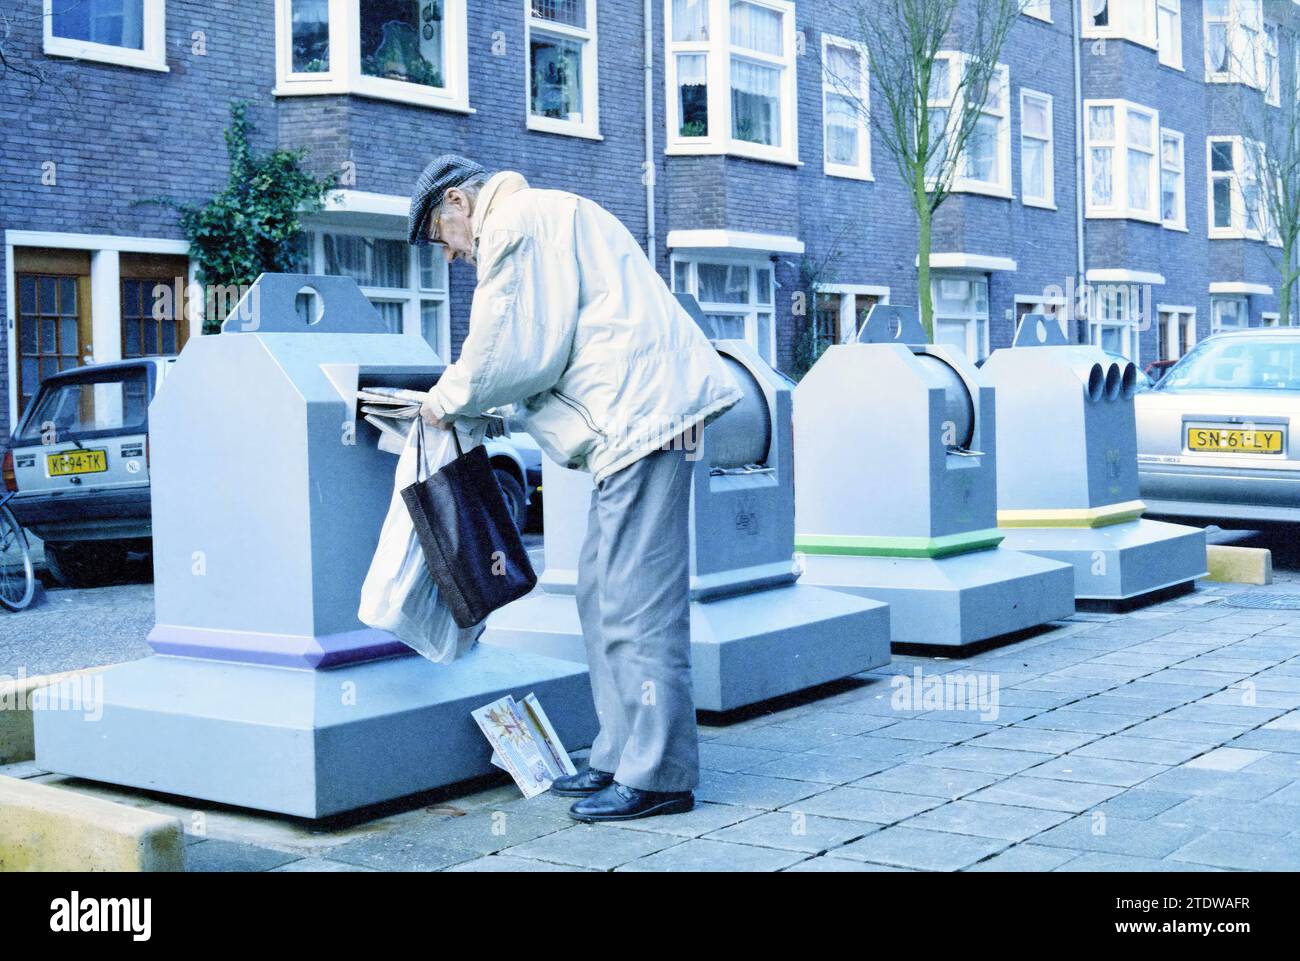 Metro waste system, Amsterdam, Amsterdam, The Netherlands, 24-01-1994, Whizgle News from the Past, Tailored for the Future. Explore historical narratives, Dutch The Netherlands agency image with a modern perspective, bridging the gap between yesterday's events and tomorrow's insights. A timeless journey shaping the stories that shape our future Stock Photo